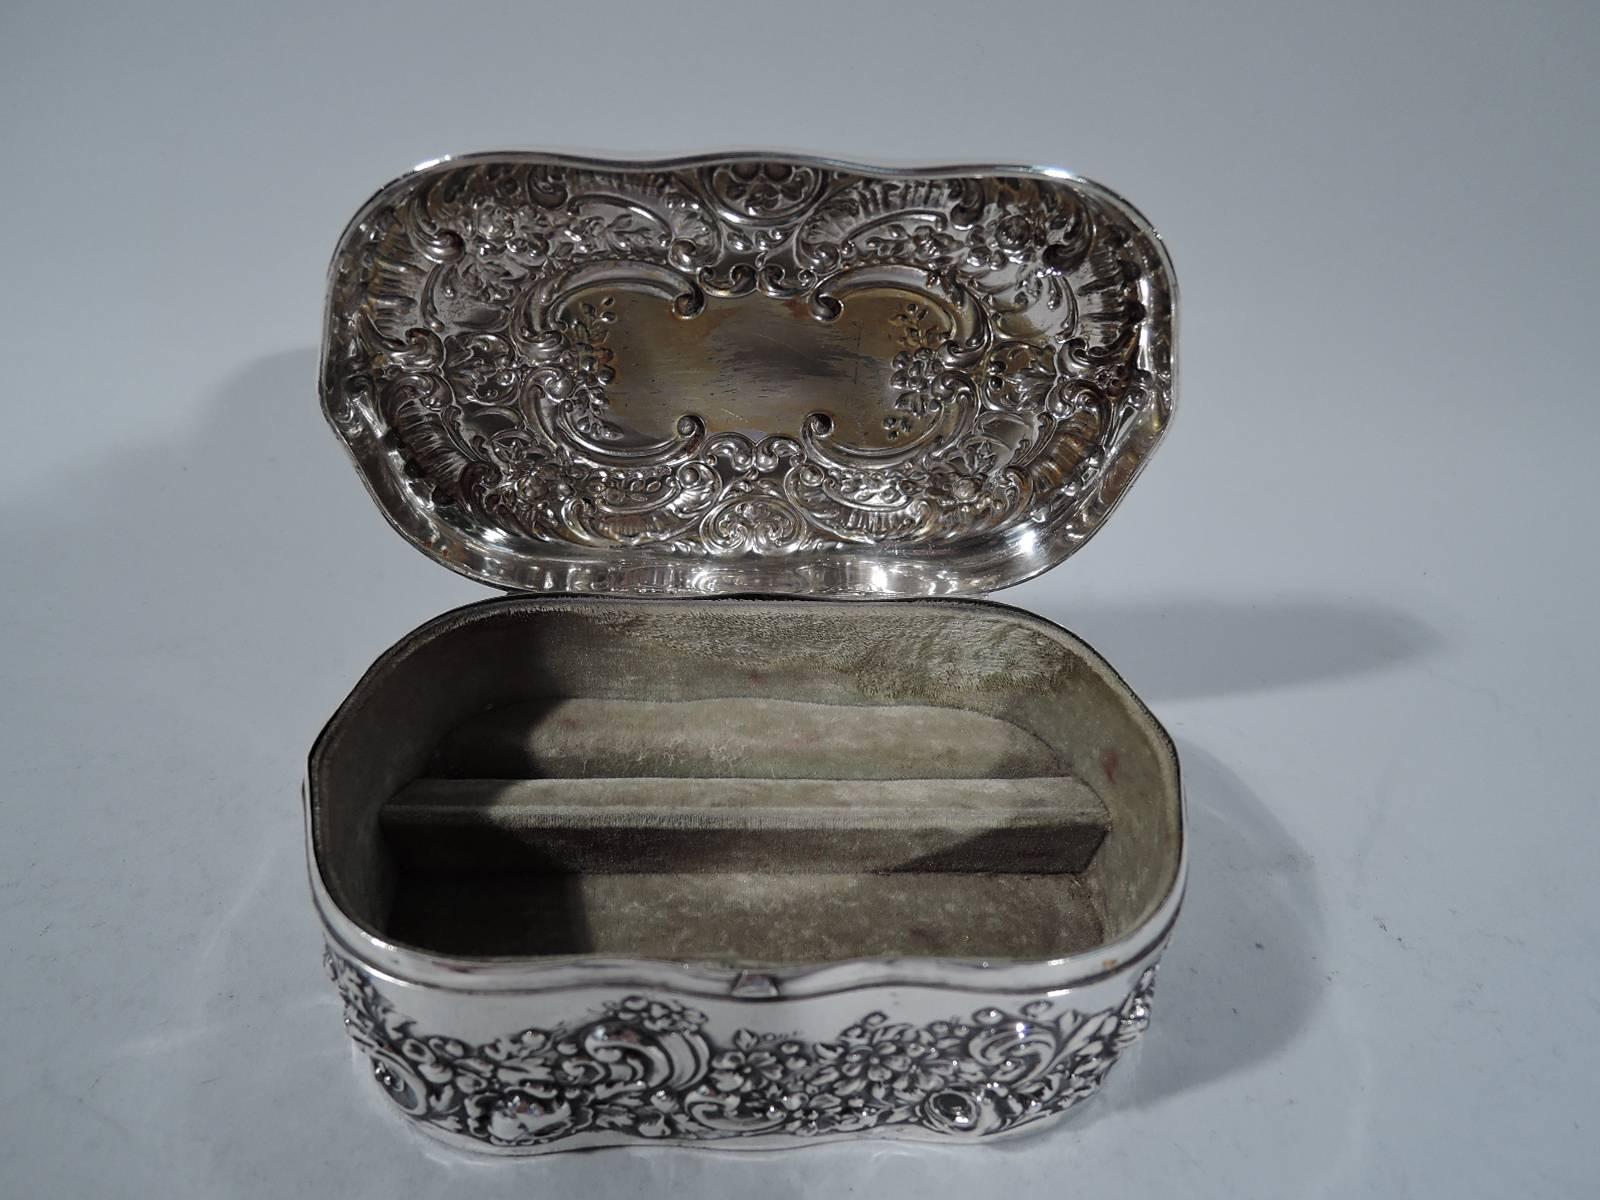 Victorian Antique Gorham Sterling Silver Jewelry Box with Floral Repousse